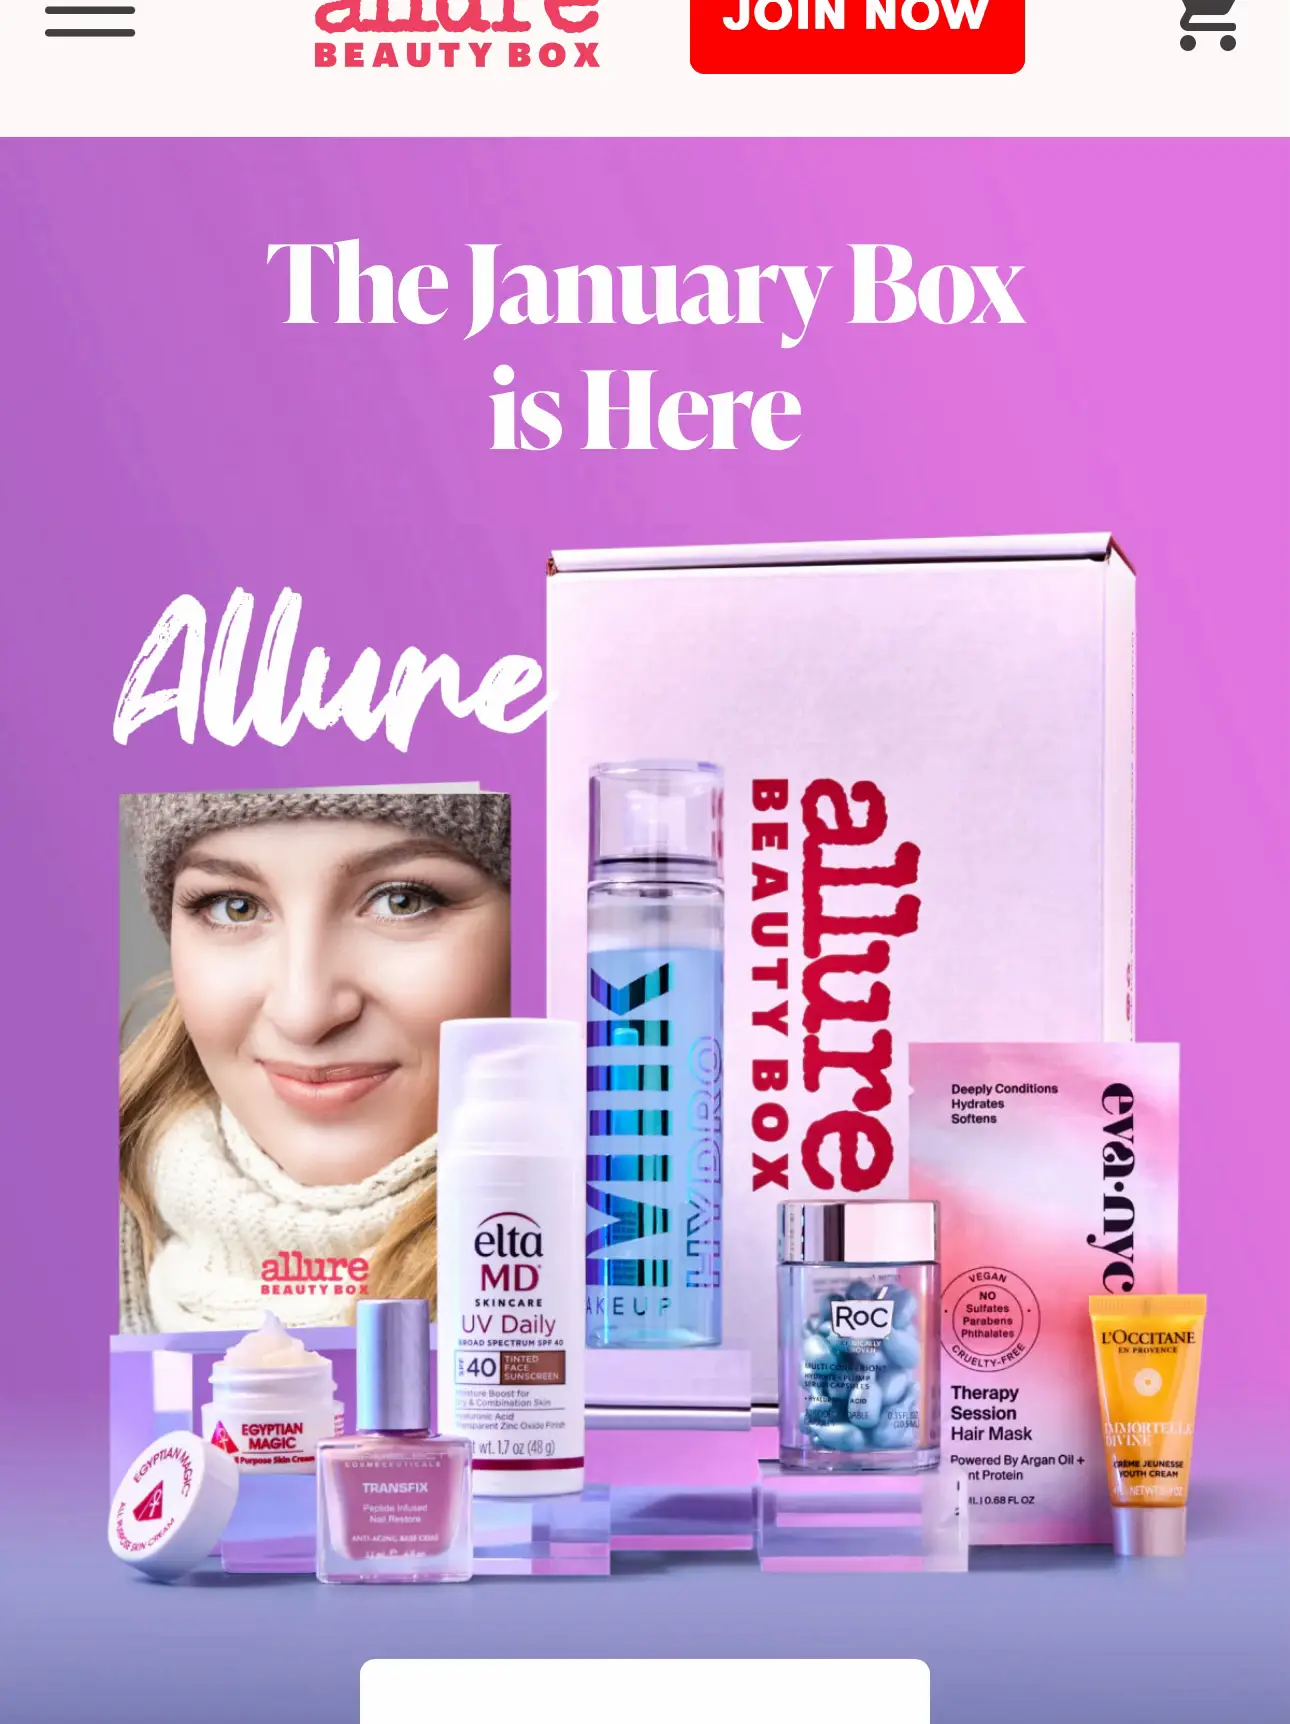 Kinder Beauty August 2021 Marine Box Spoilers + Exclusive Coupon